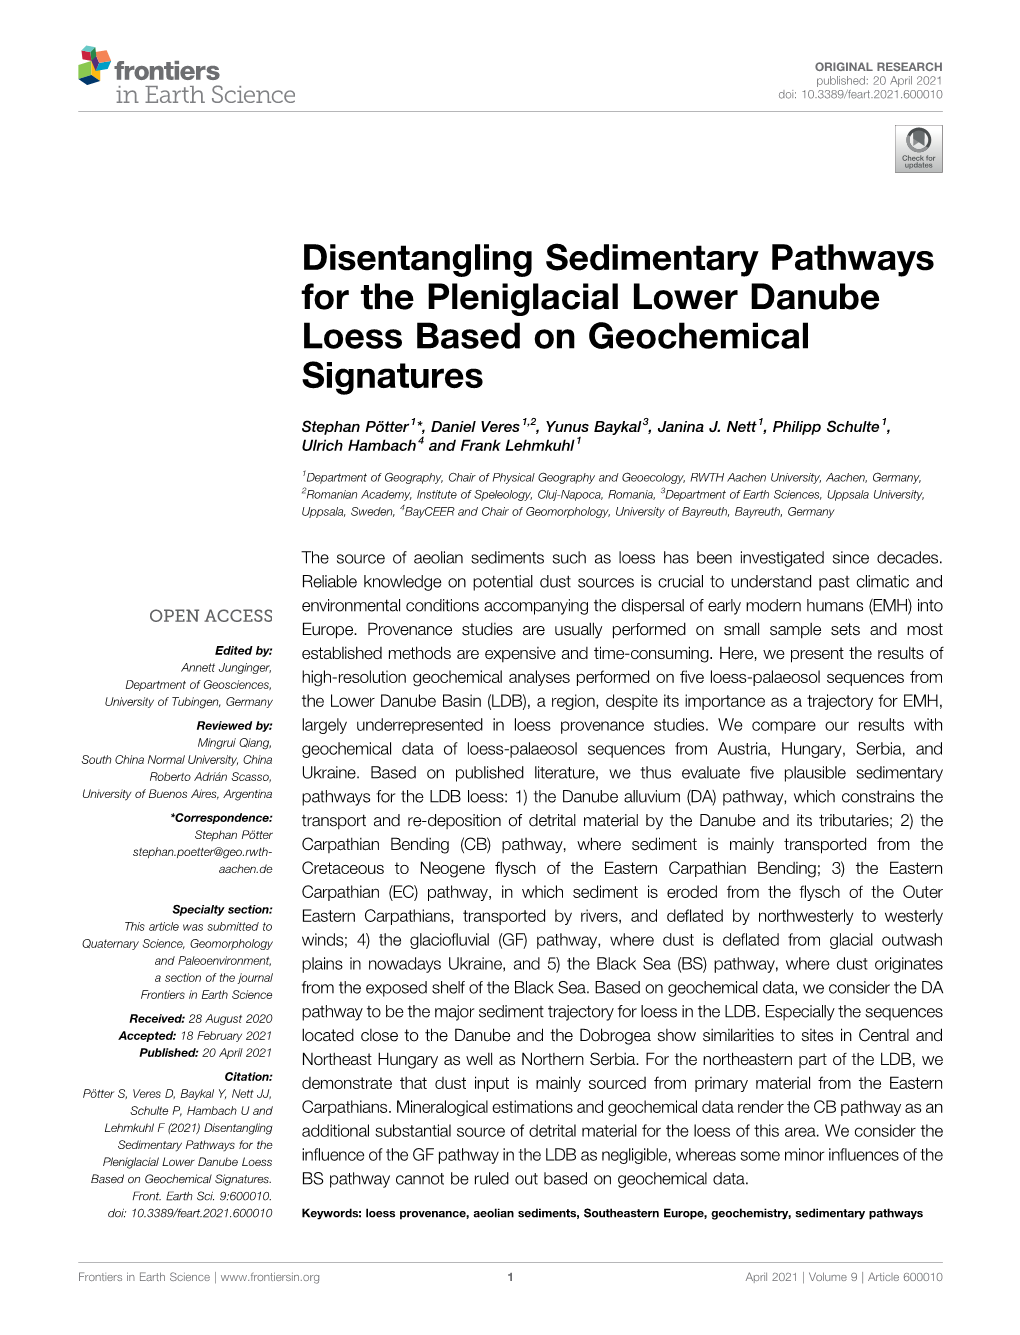 Disentangling Sedimentary Pathways for the Pleniglacial Lower Danube Loess Based on Geochemical Signatures